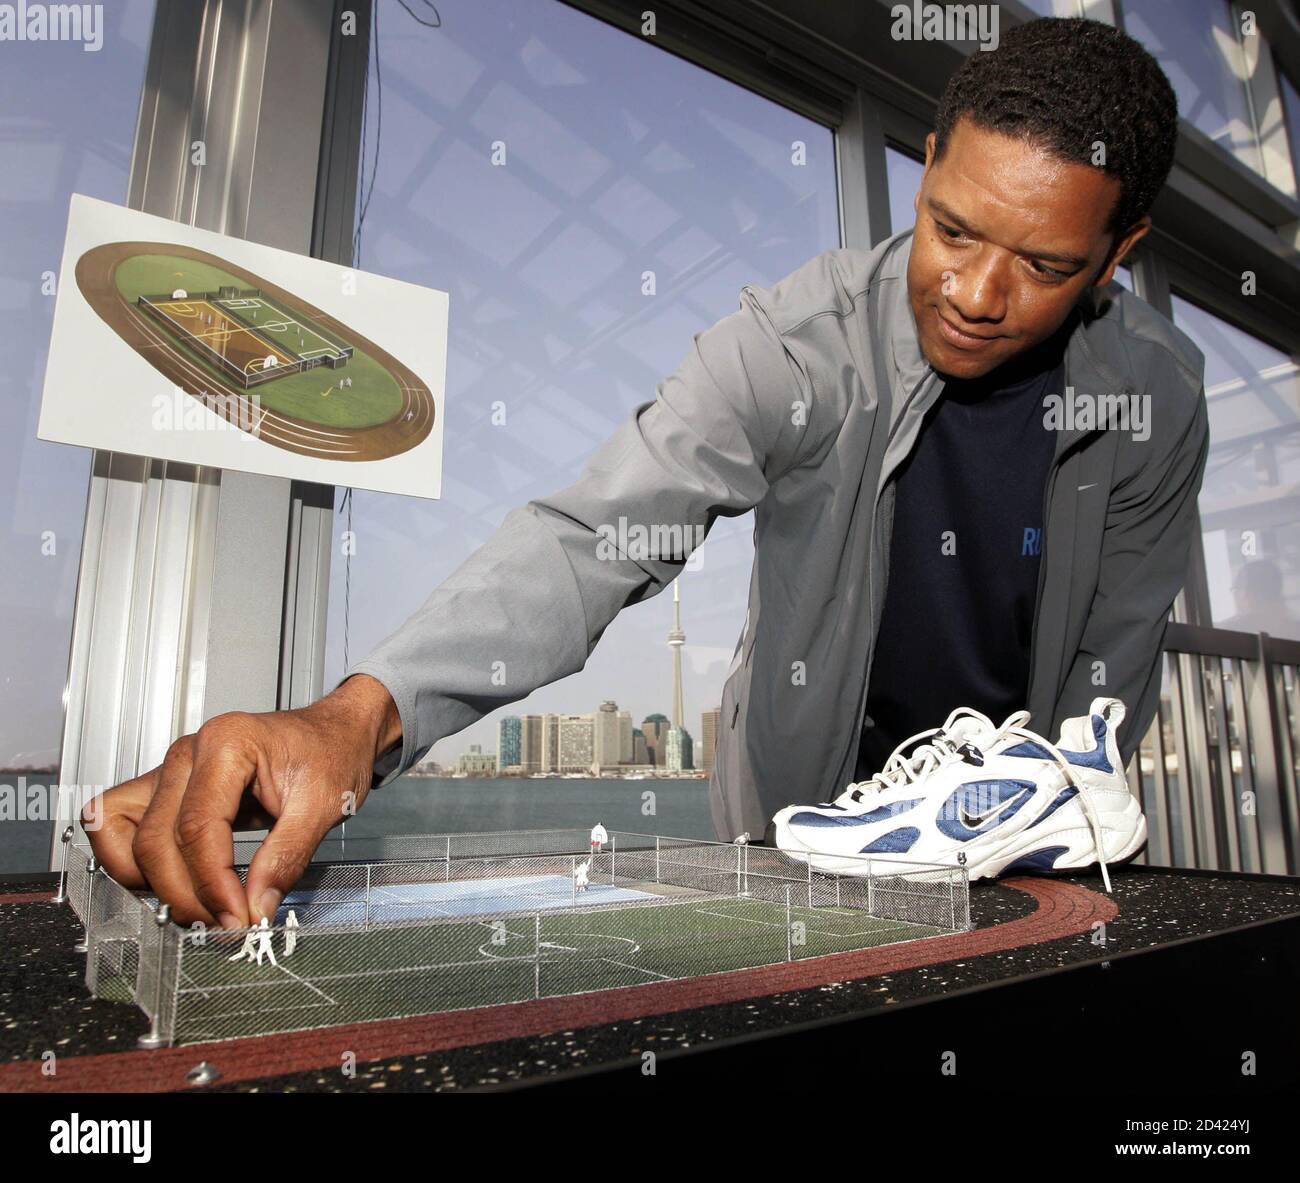 Toronto Argonaut quarterback Damon Allen adjusts a miniature soccer player  on a model of a sports complex which Nike Canada announced will be built  out of 'Nike Grind' (recycled shoe material) at